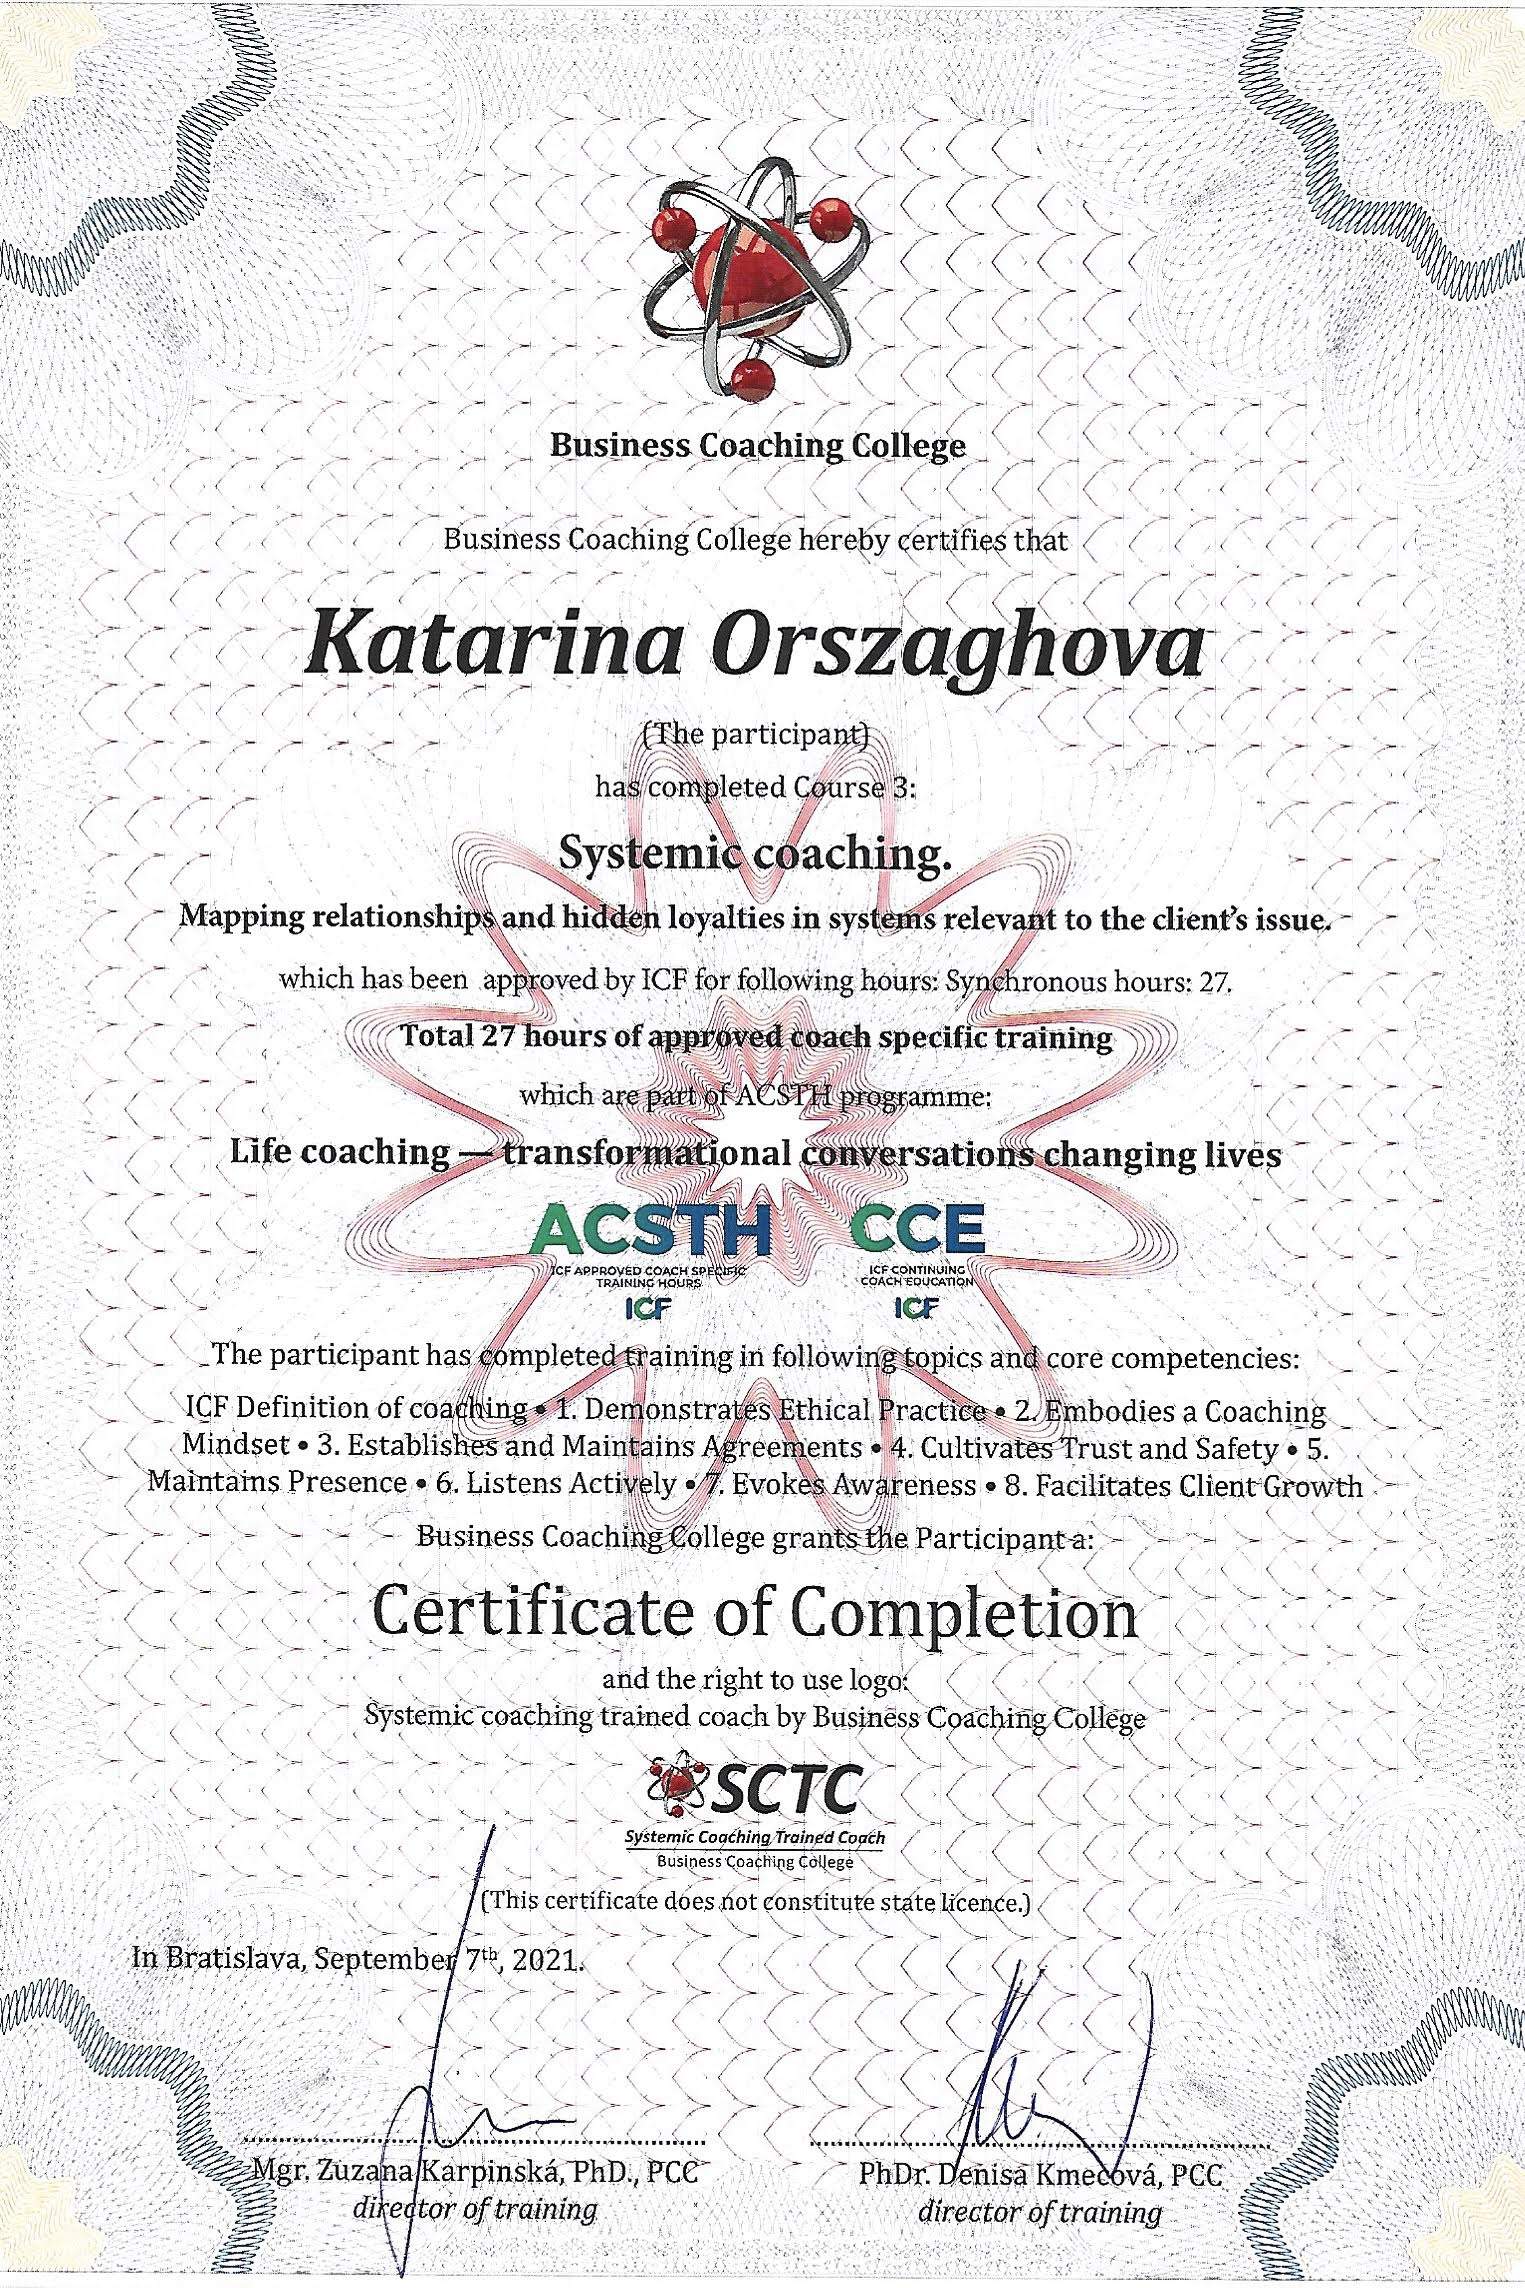 Systemic Coaching Trained Coach